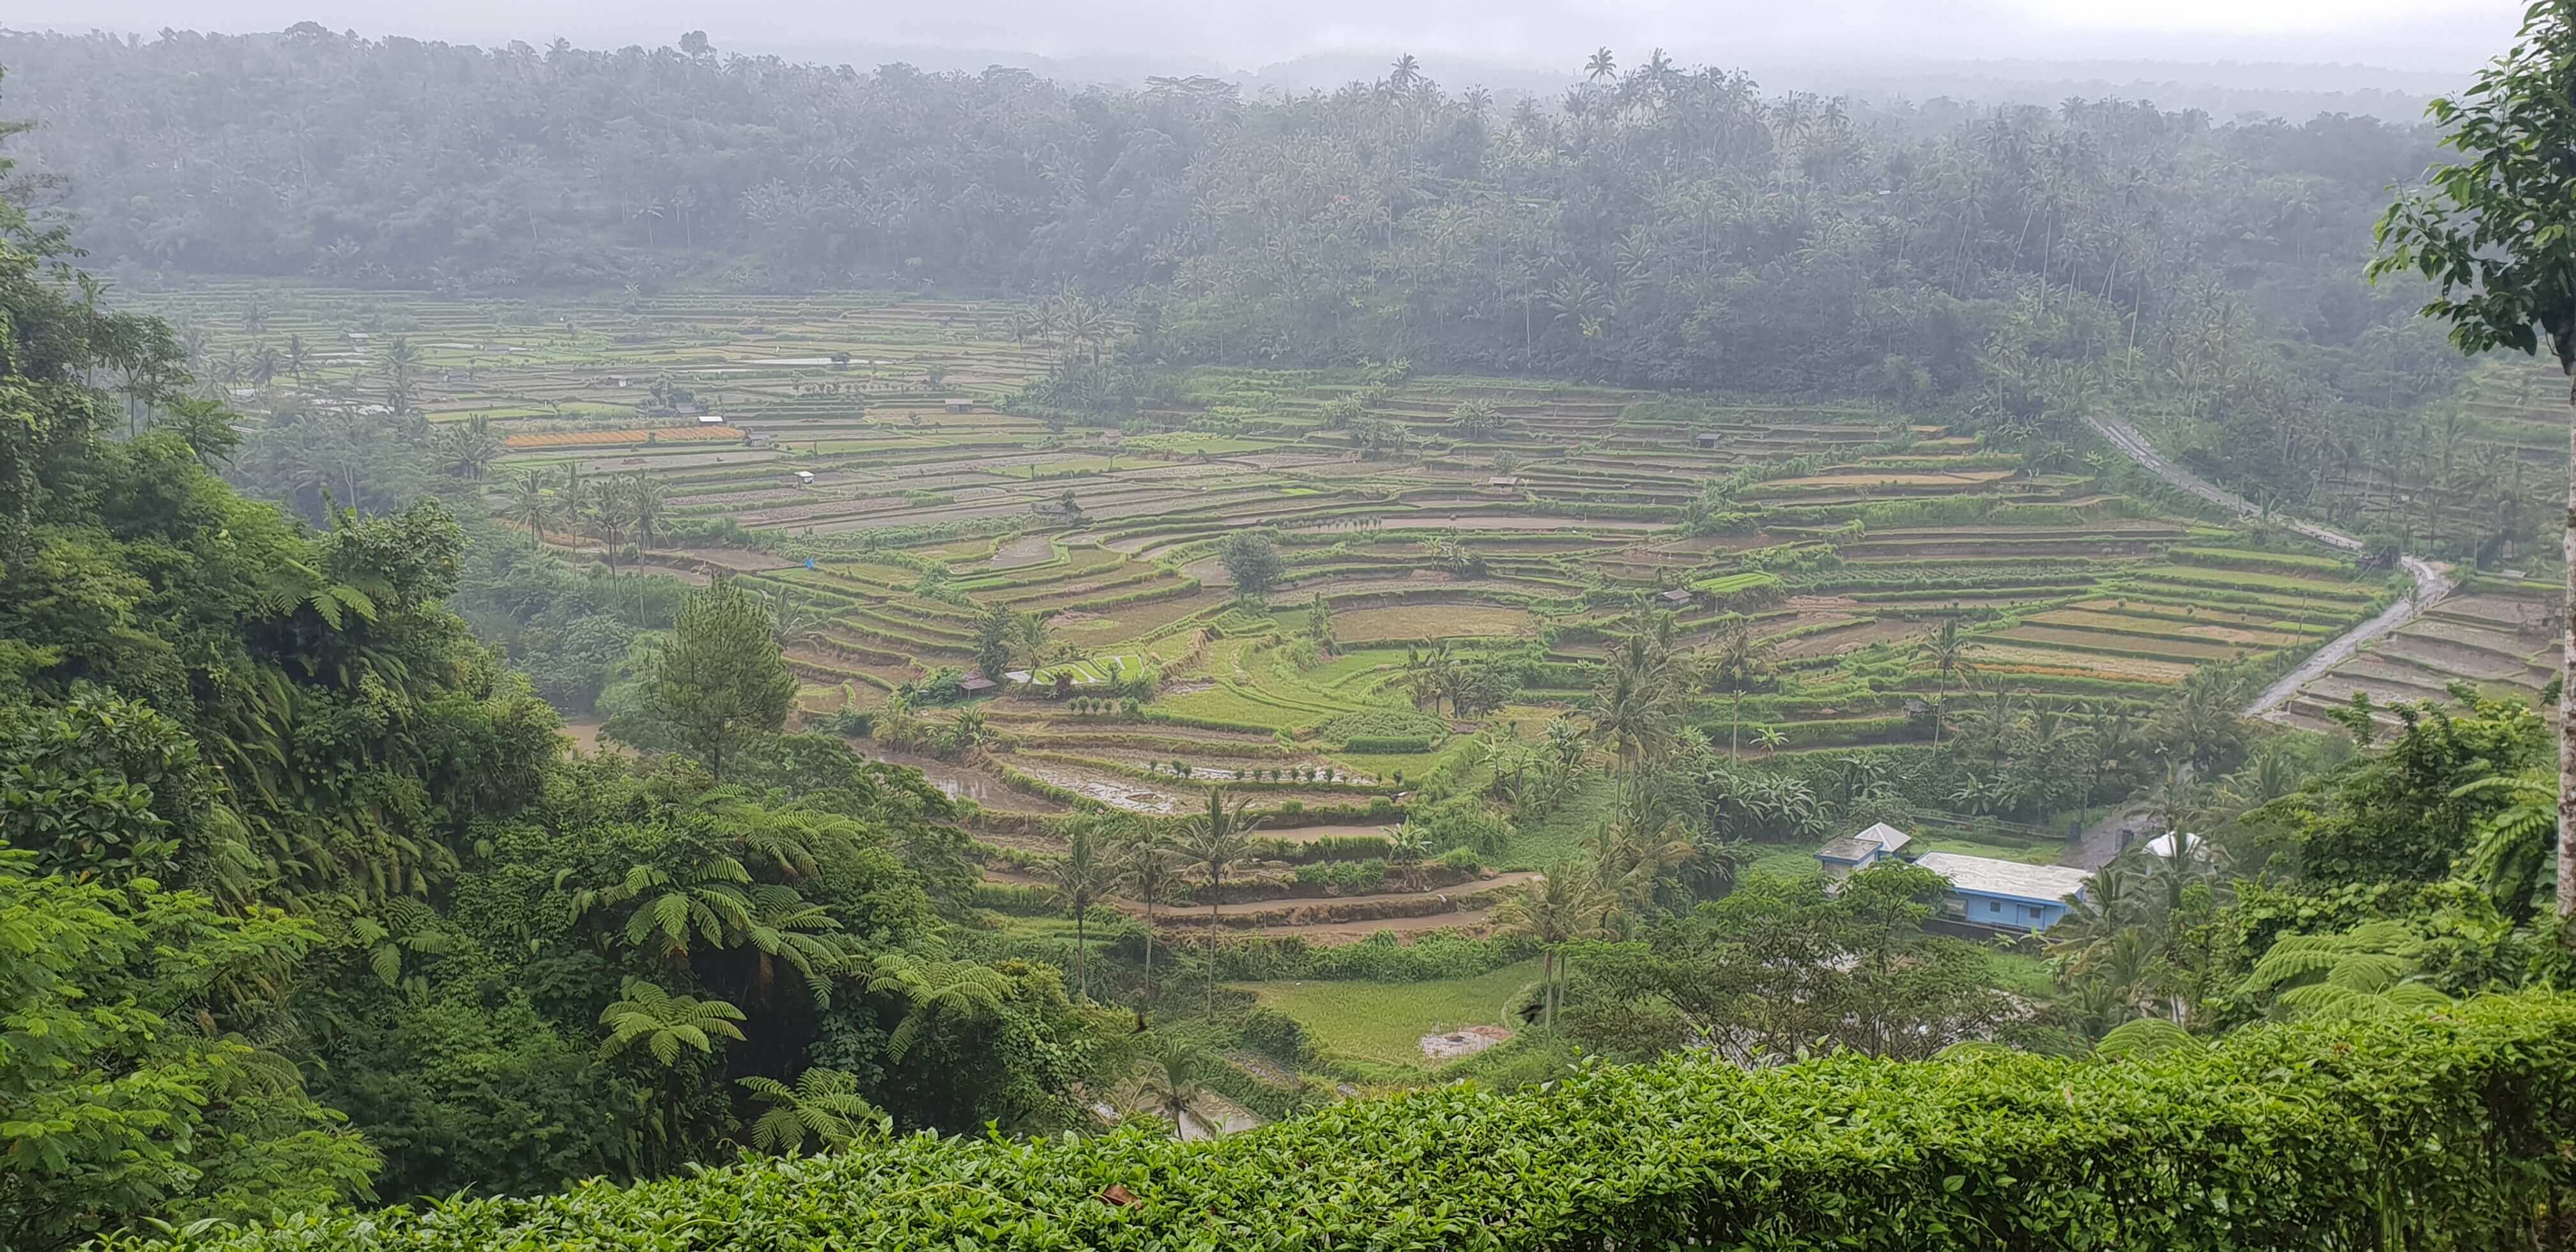 Panoramic view from the Mahagiri Resort and Restaurant, which was a surprise inclusion in our Ubud itinerary thanks to our driver Ariyana's recommendation